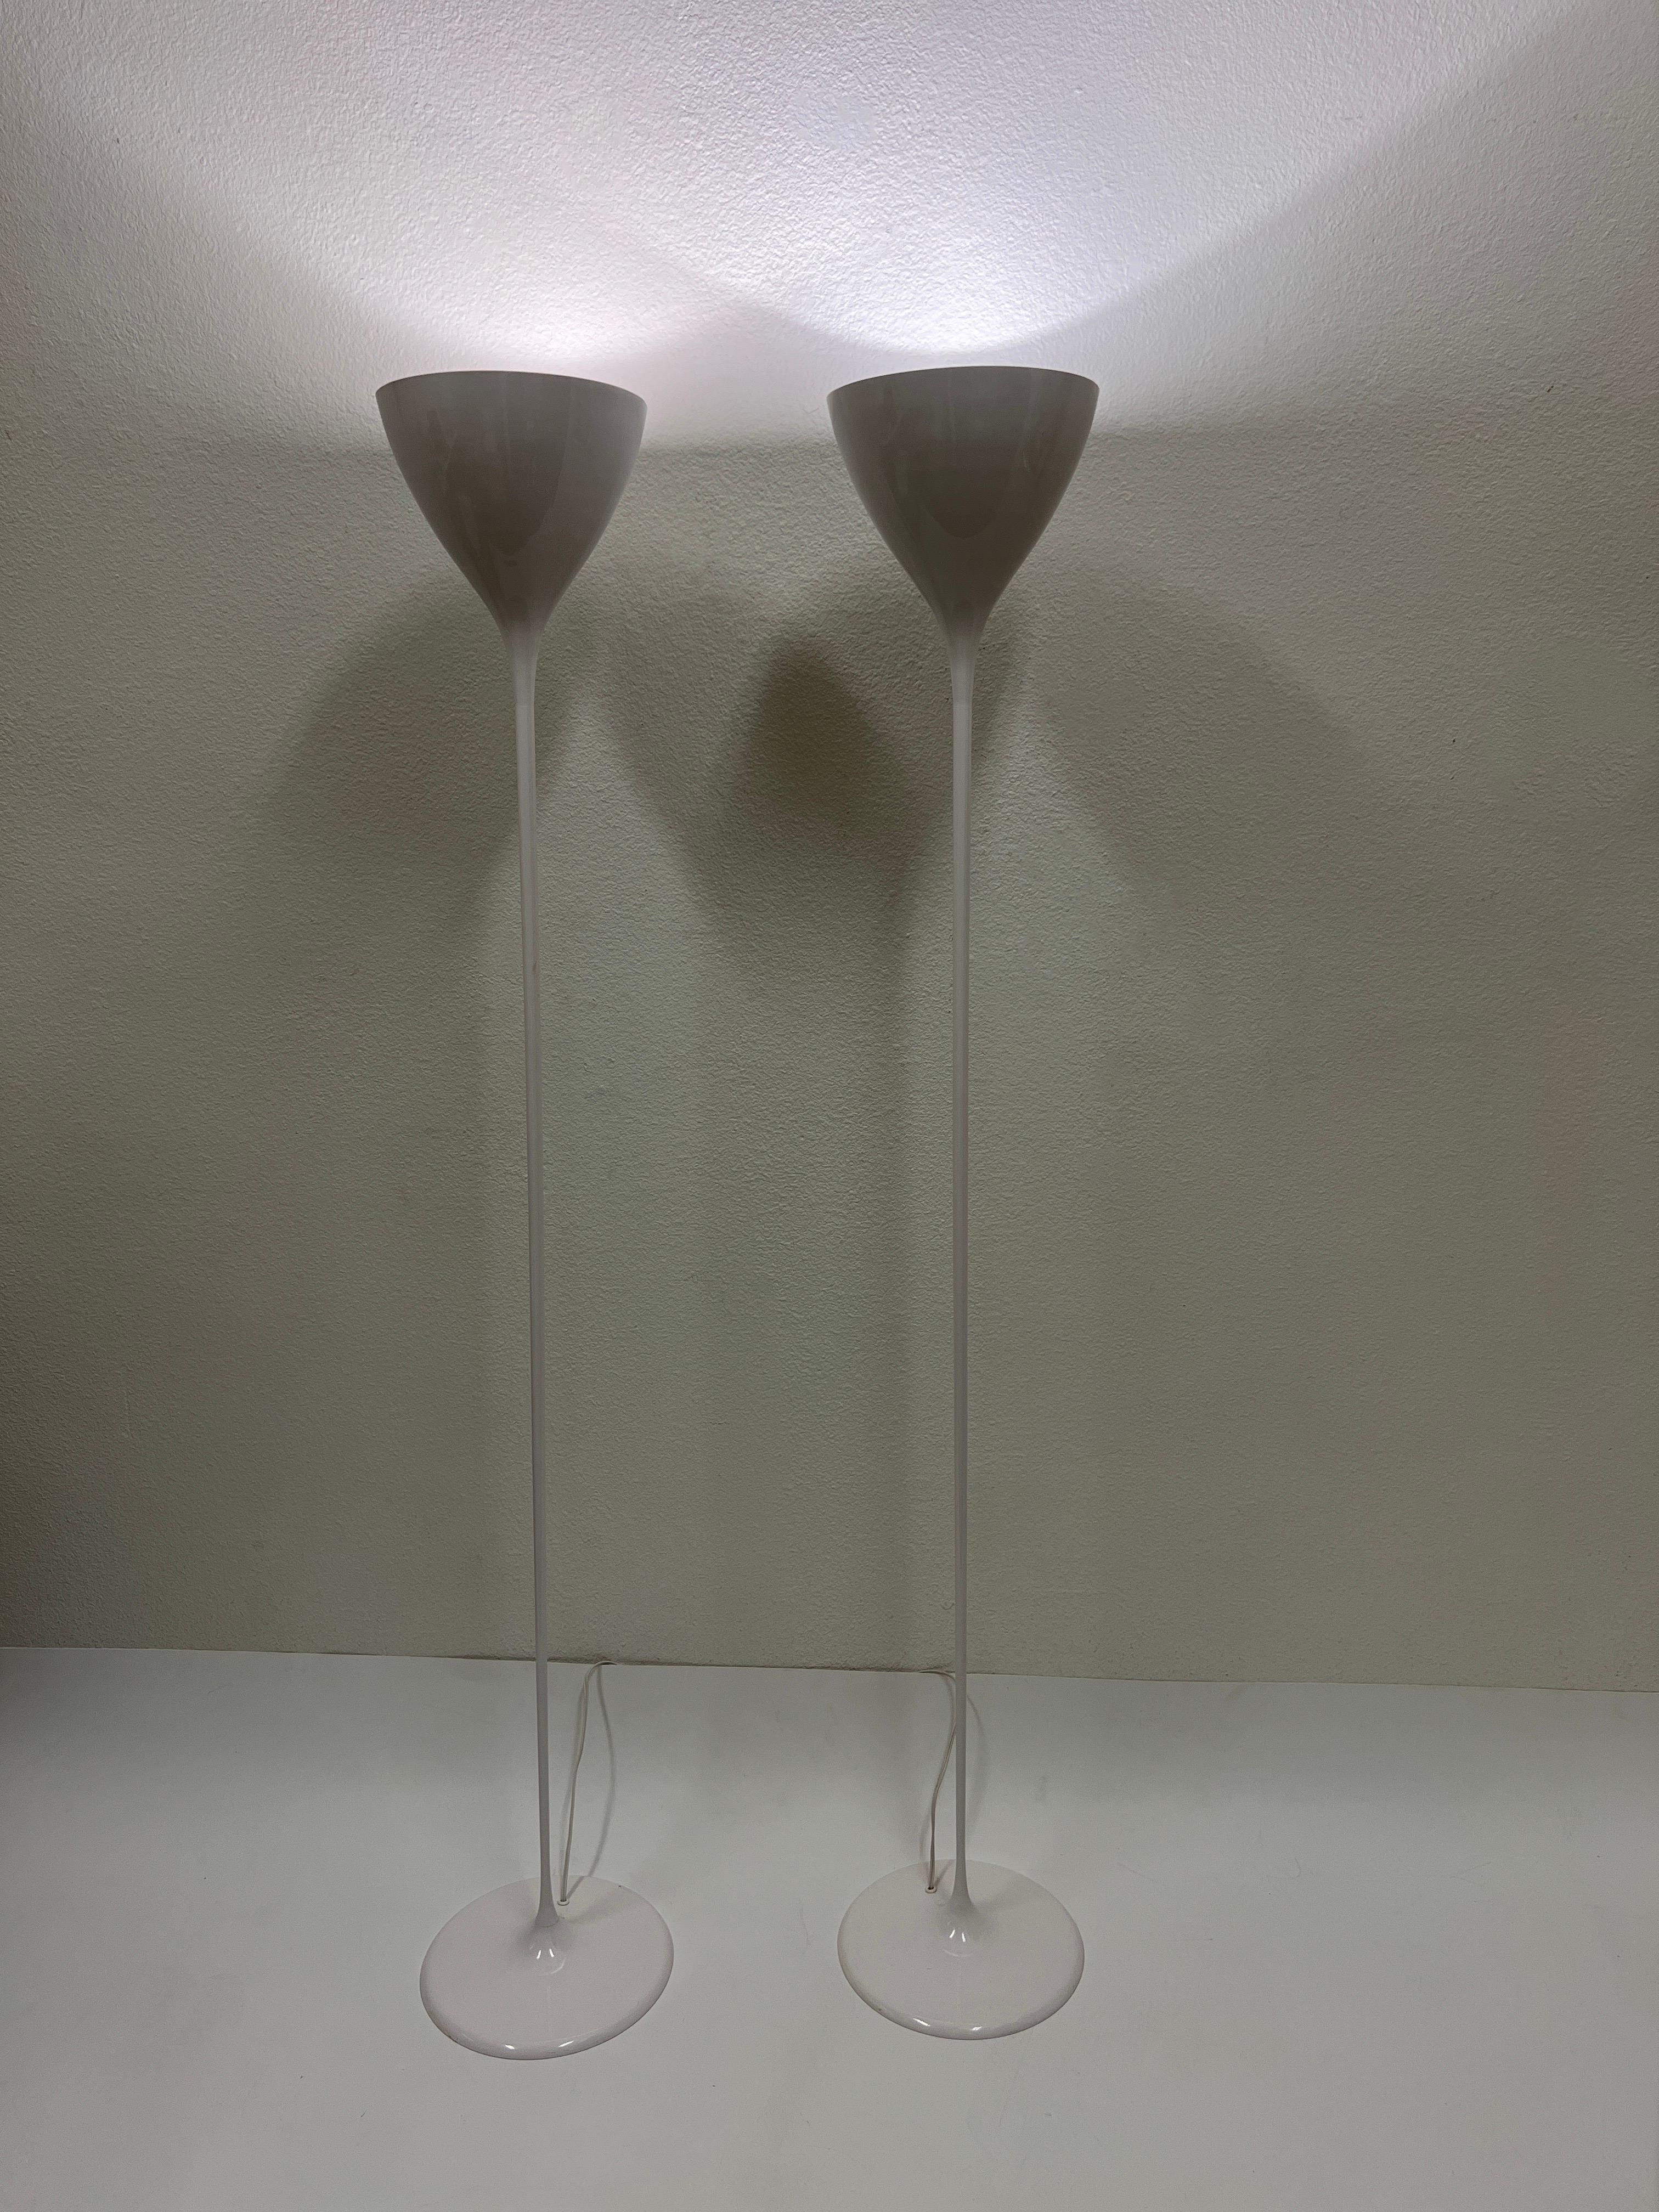 Swiss Swedish Pair White Torchieres Floor Lamps by Max Bill